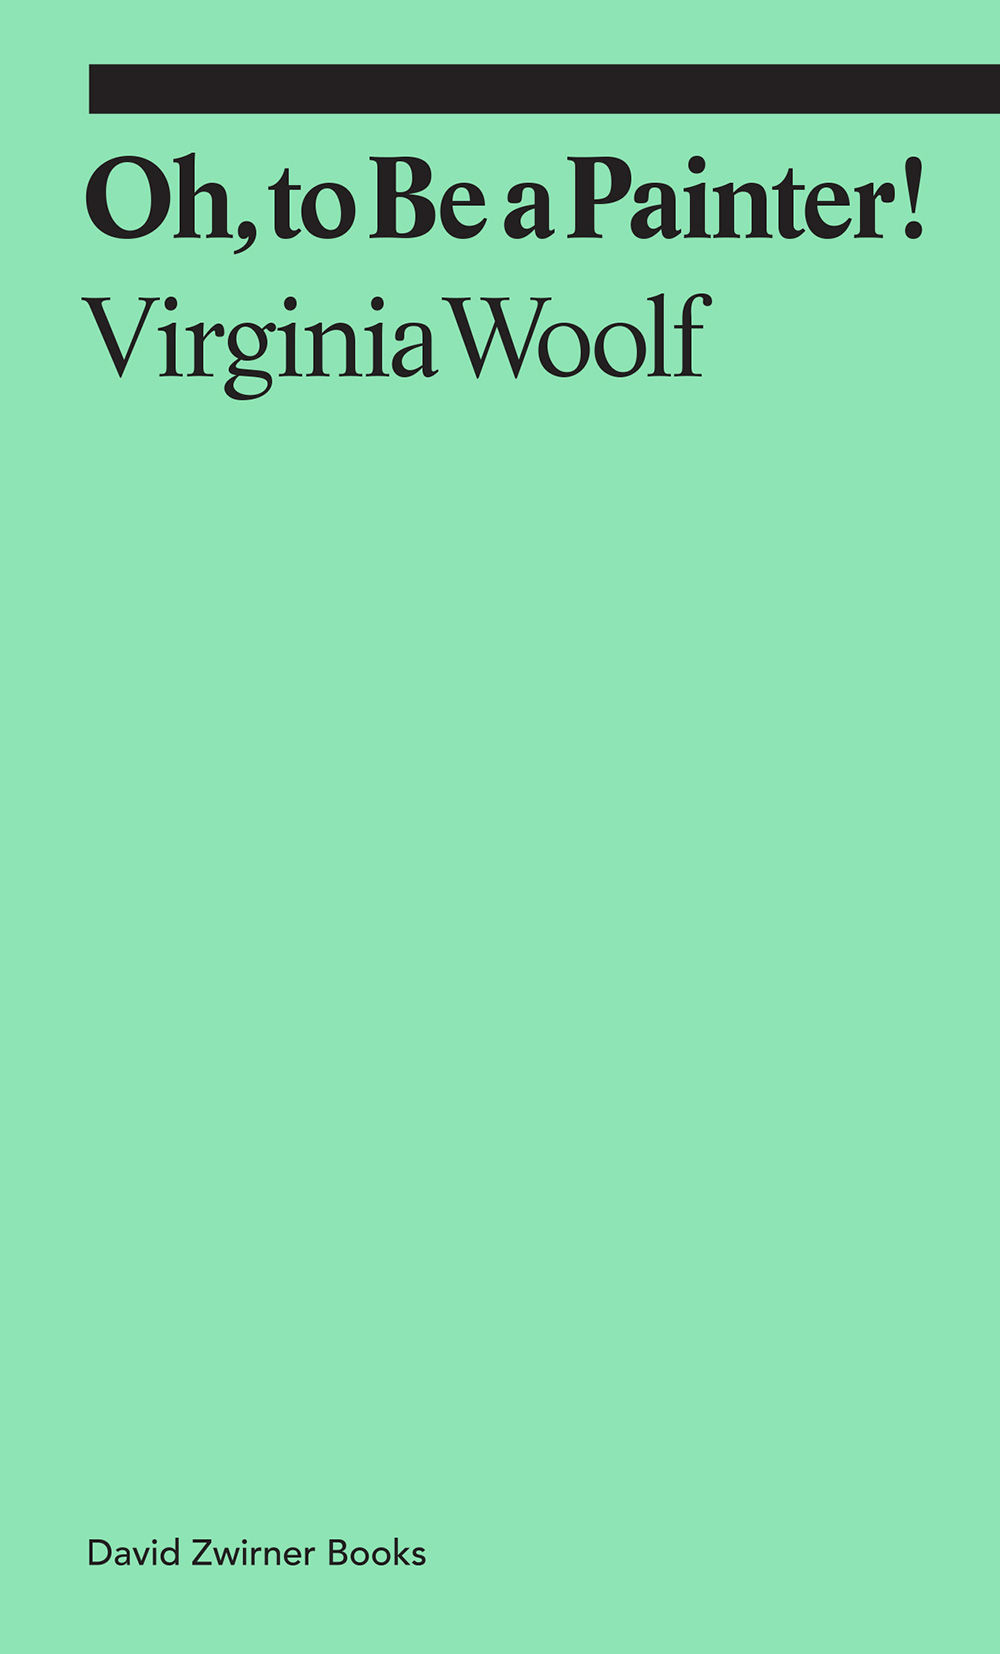 Cover of a book titled Oh, to be a Painter! by Virginia Woolf, published by David Zwirner Books in 2021.